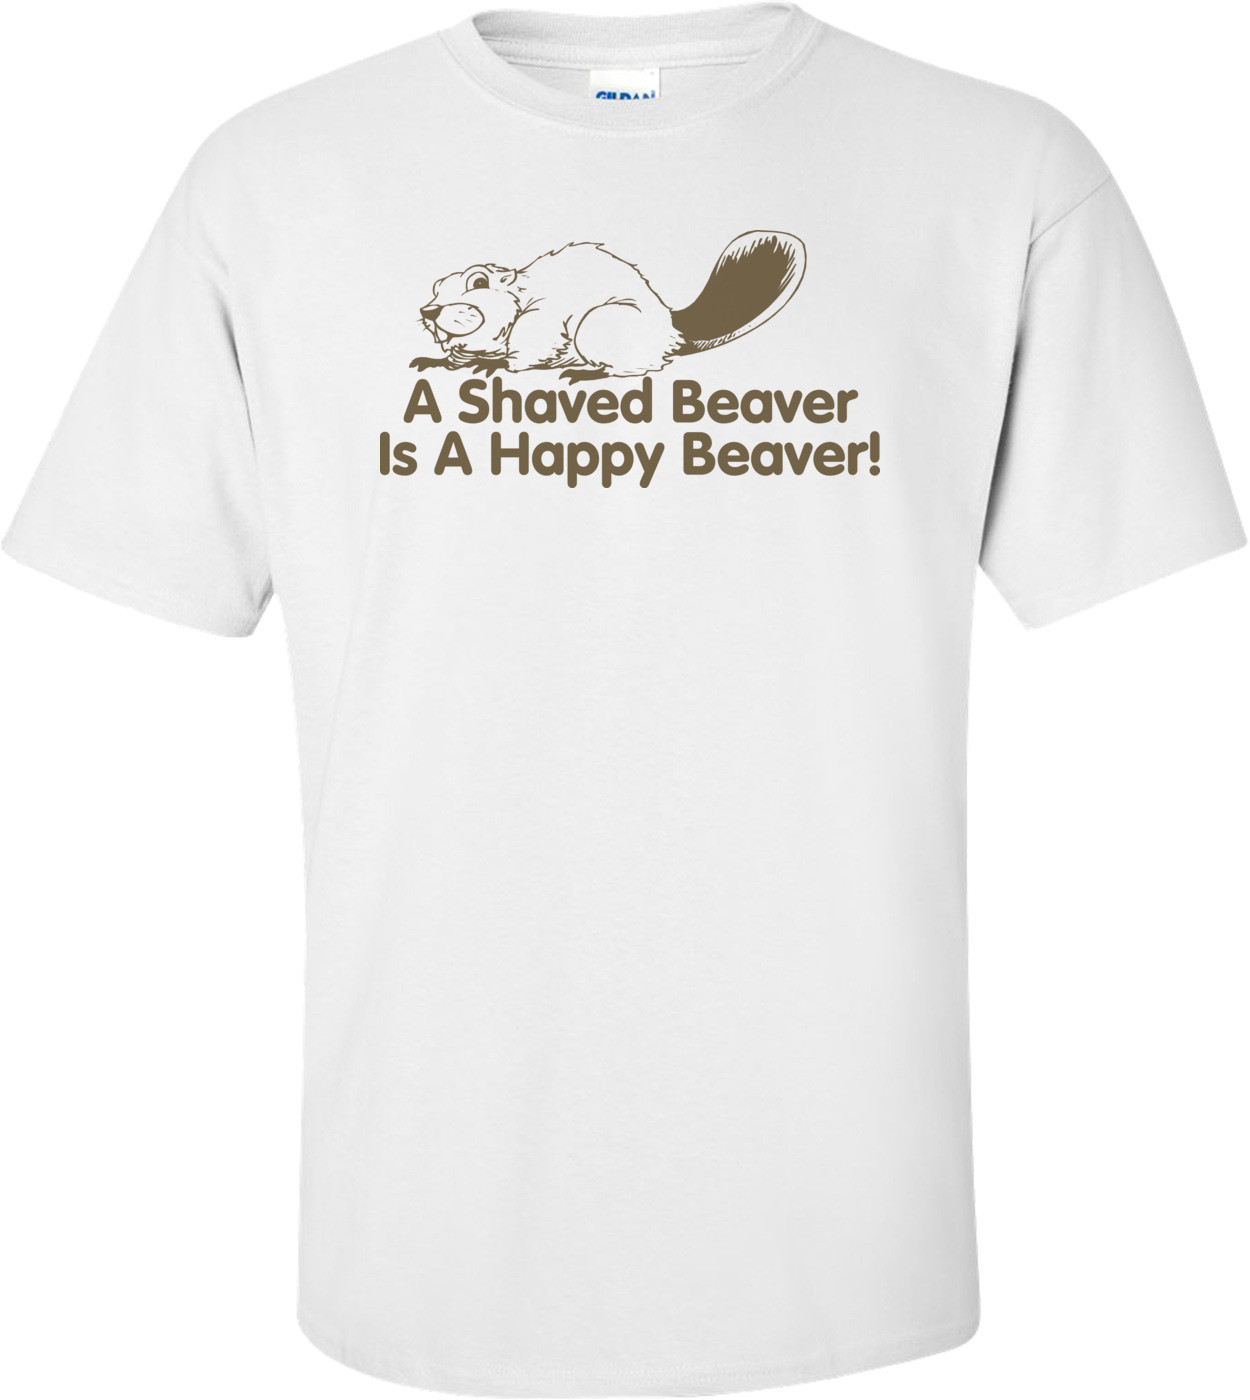 A Shaved Beaver Is A Happy Beaver T-shirt 